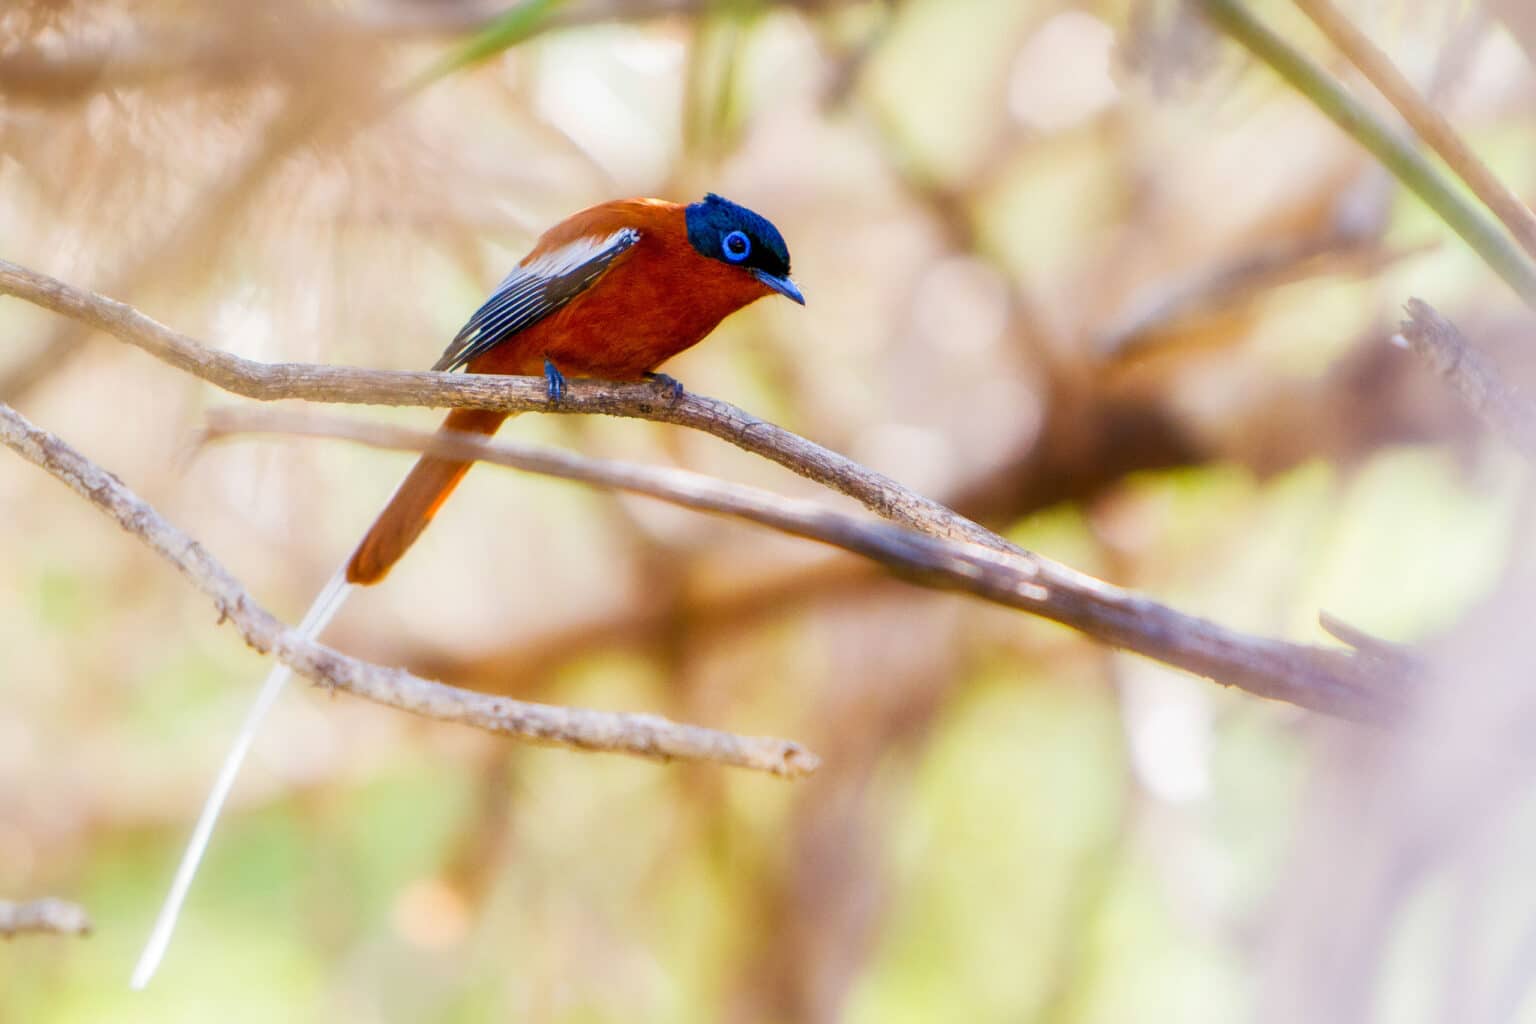 Malagasy paradise flycatcher bird with bright blue head and orange body sits on branch.